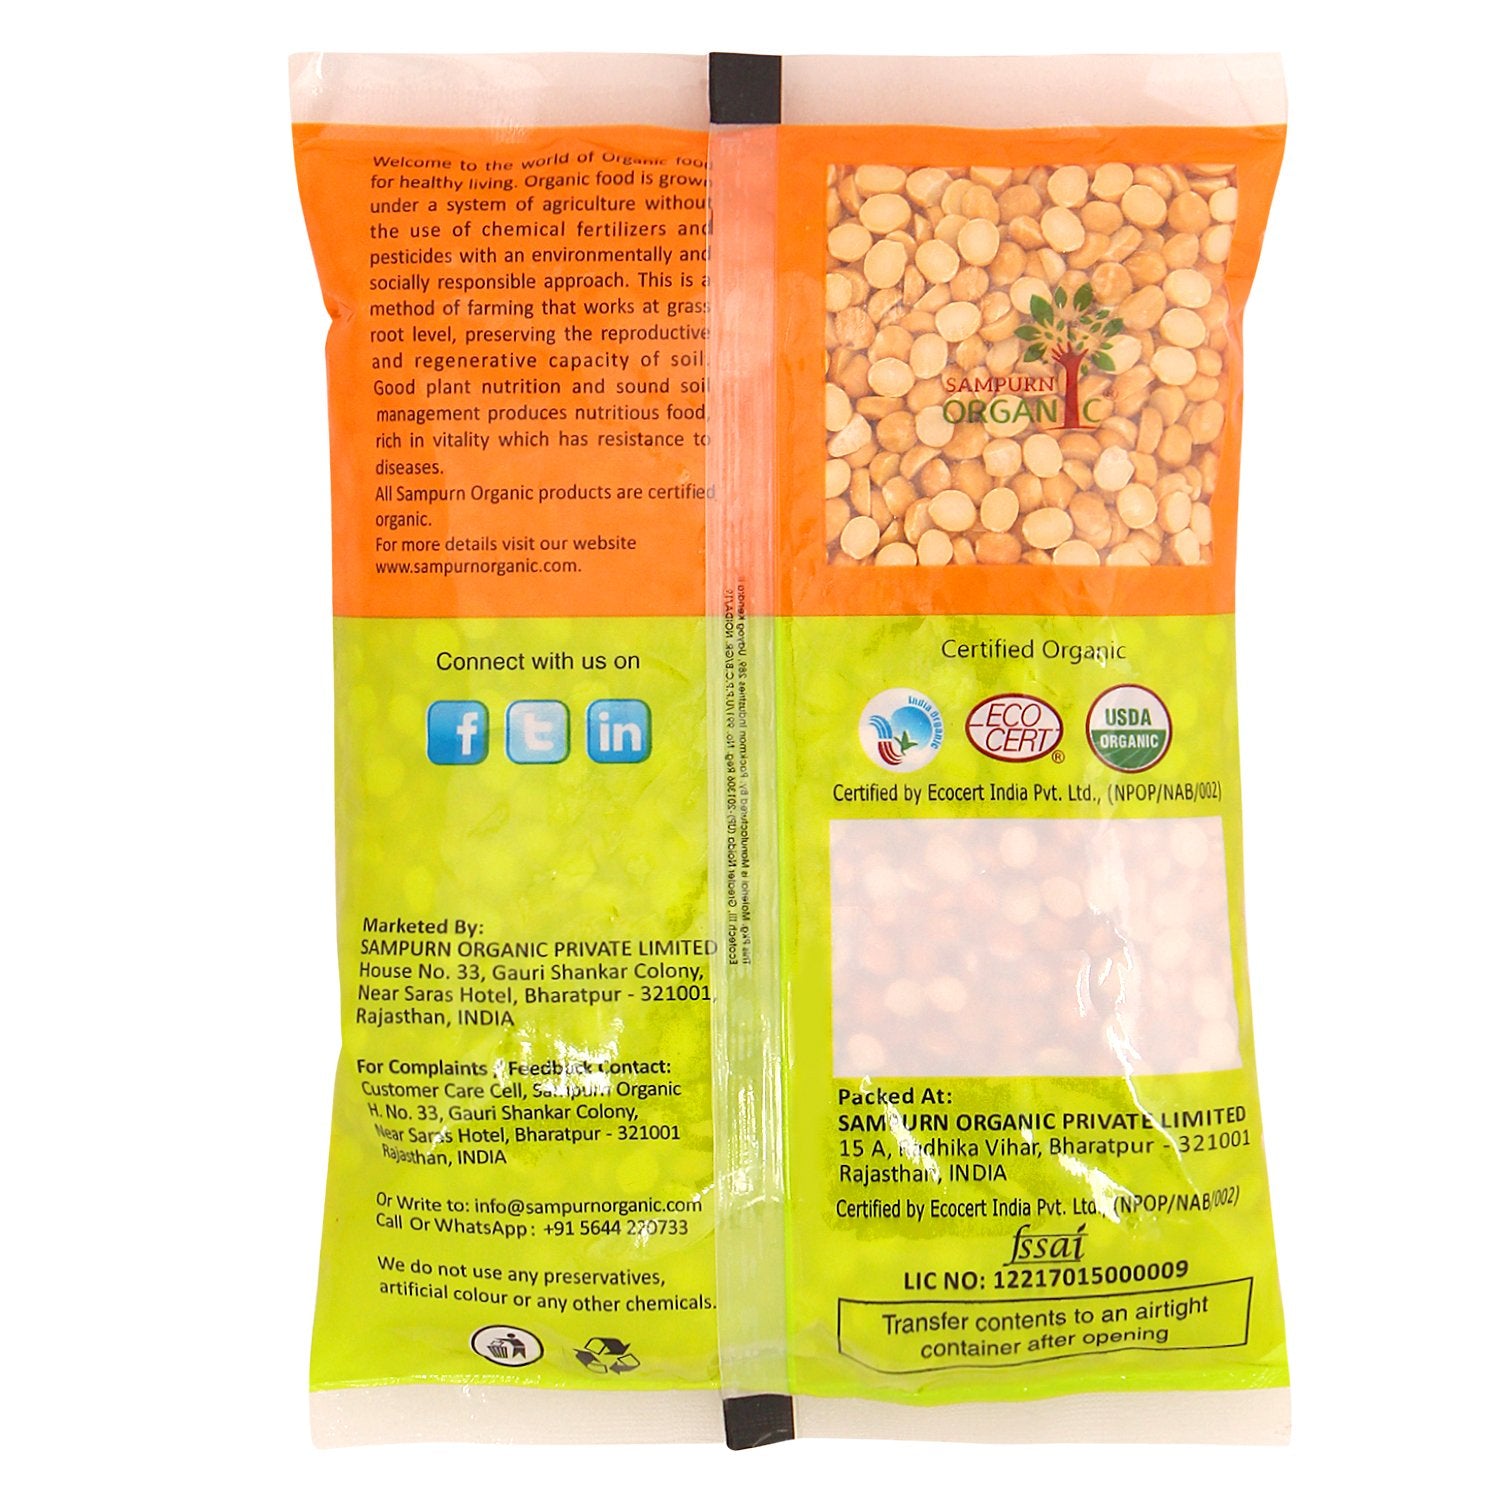 Sampurn Organic Chana dal namkeen 500 gm 1 kg combo pack yellow roasted daal chhole channa pulses dal500g chickpeas lentils peas curry nutrition recipe split bengal gram whole flour pulses ogranic